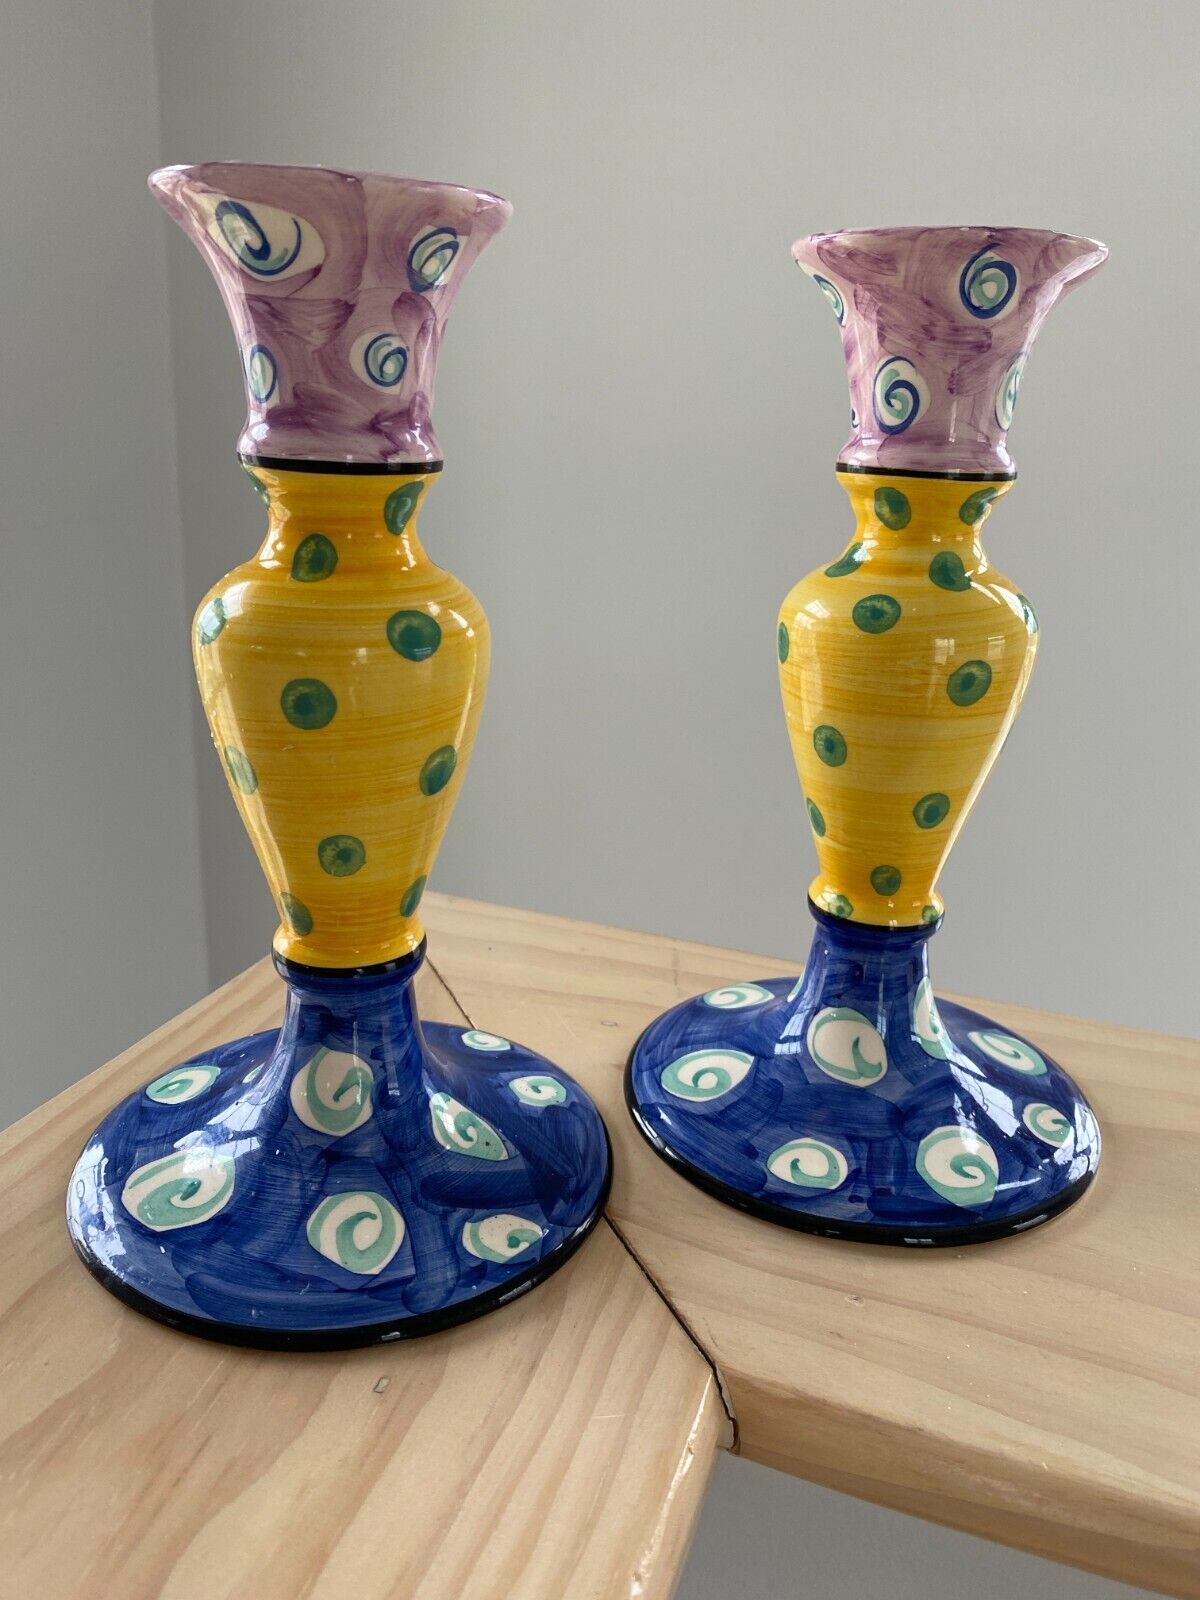 Set of 2 Candle Sticks - Favanol - Portugal - Hand Painted